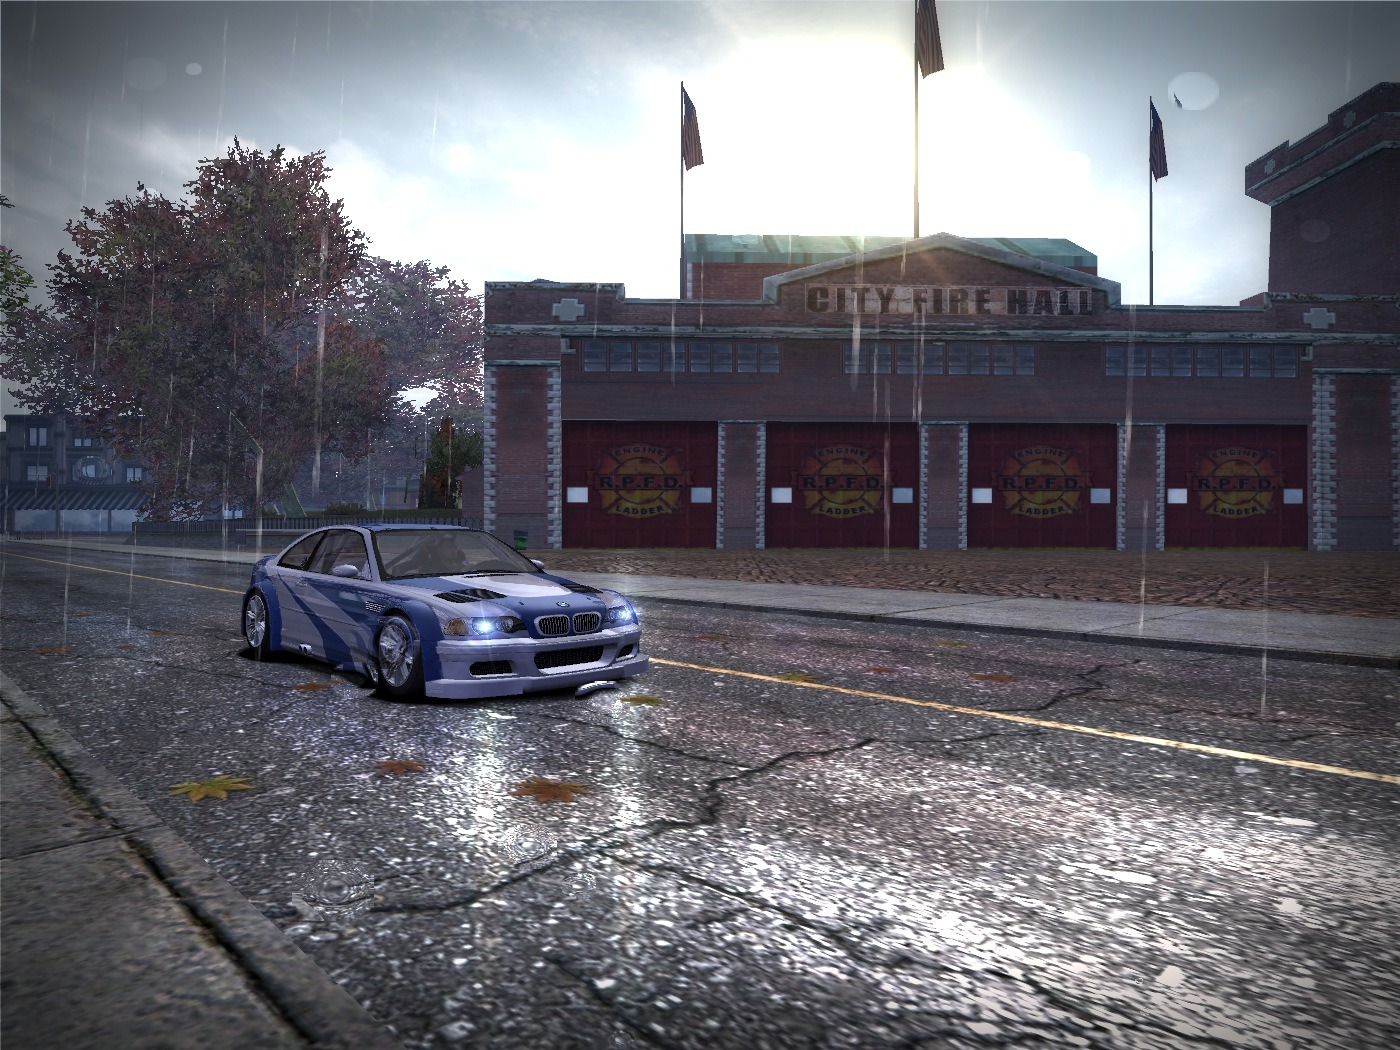 Nfs города. Рокпорт need for Speed. NFS most wanted Rockport. Рокпорт город NFS. Need for Speed: most wanted город Рокпорт.